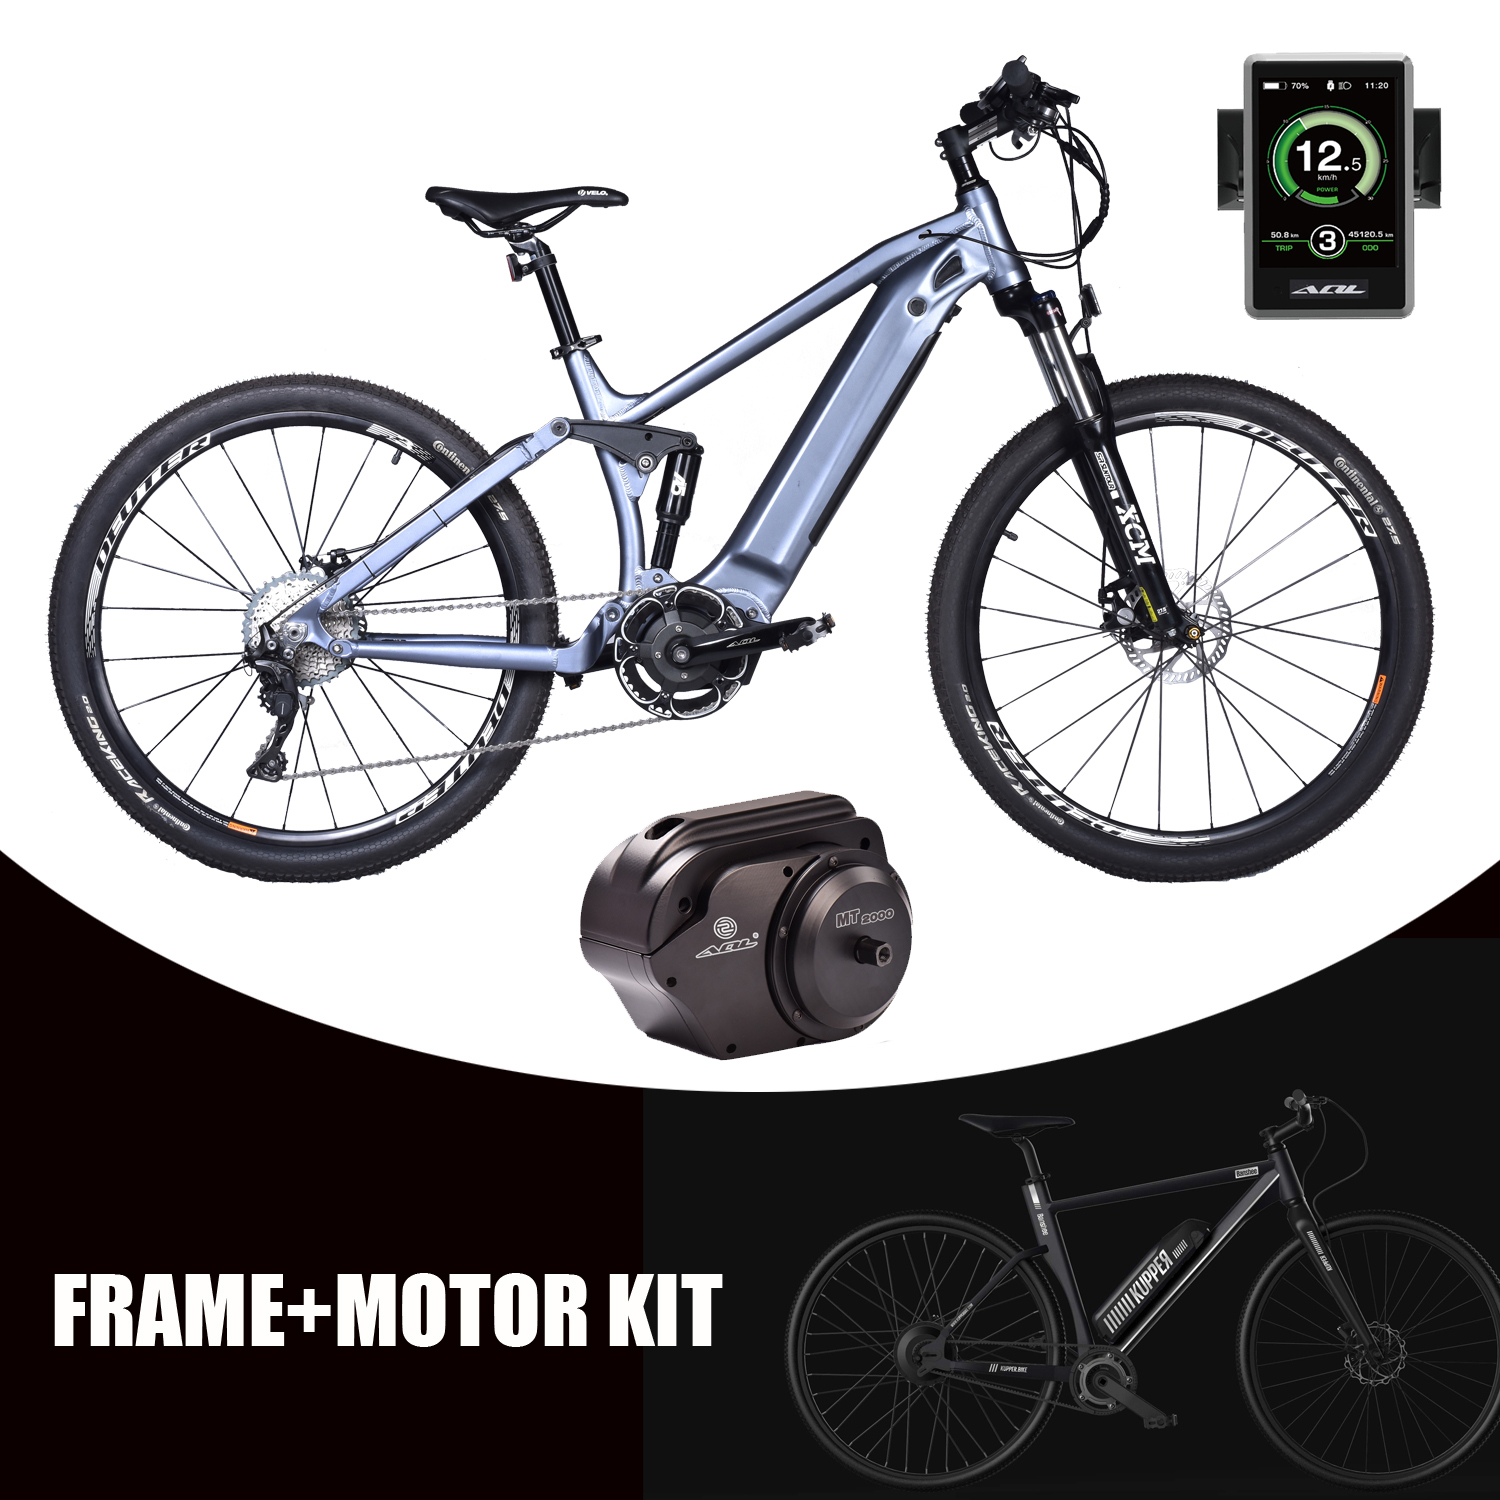 48V 350W Bafang Rear Drive MTB eBike 26*4.0” Full Suspension Fat Tire Electric Bike with absorber